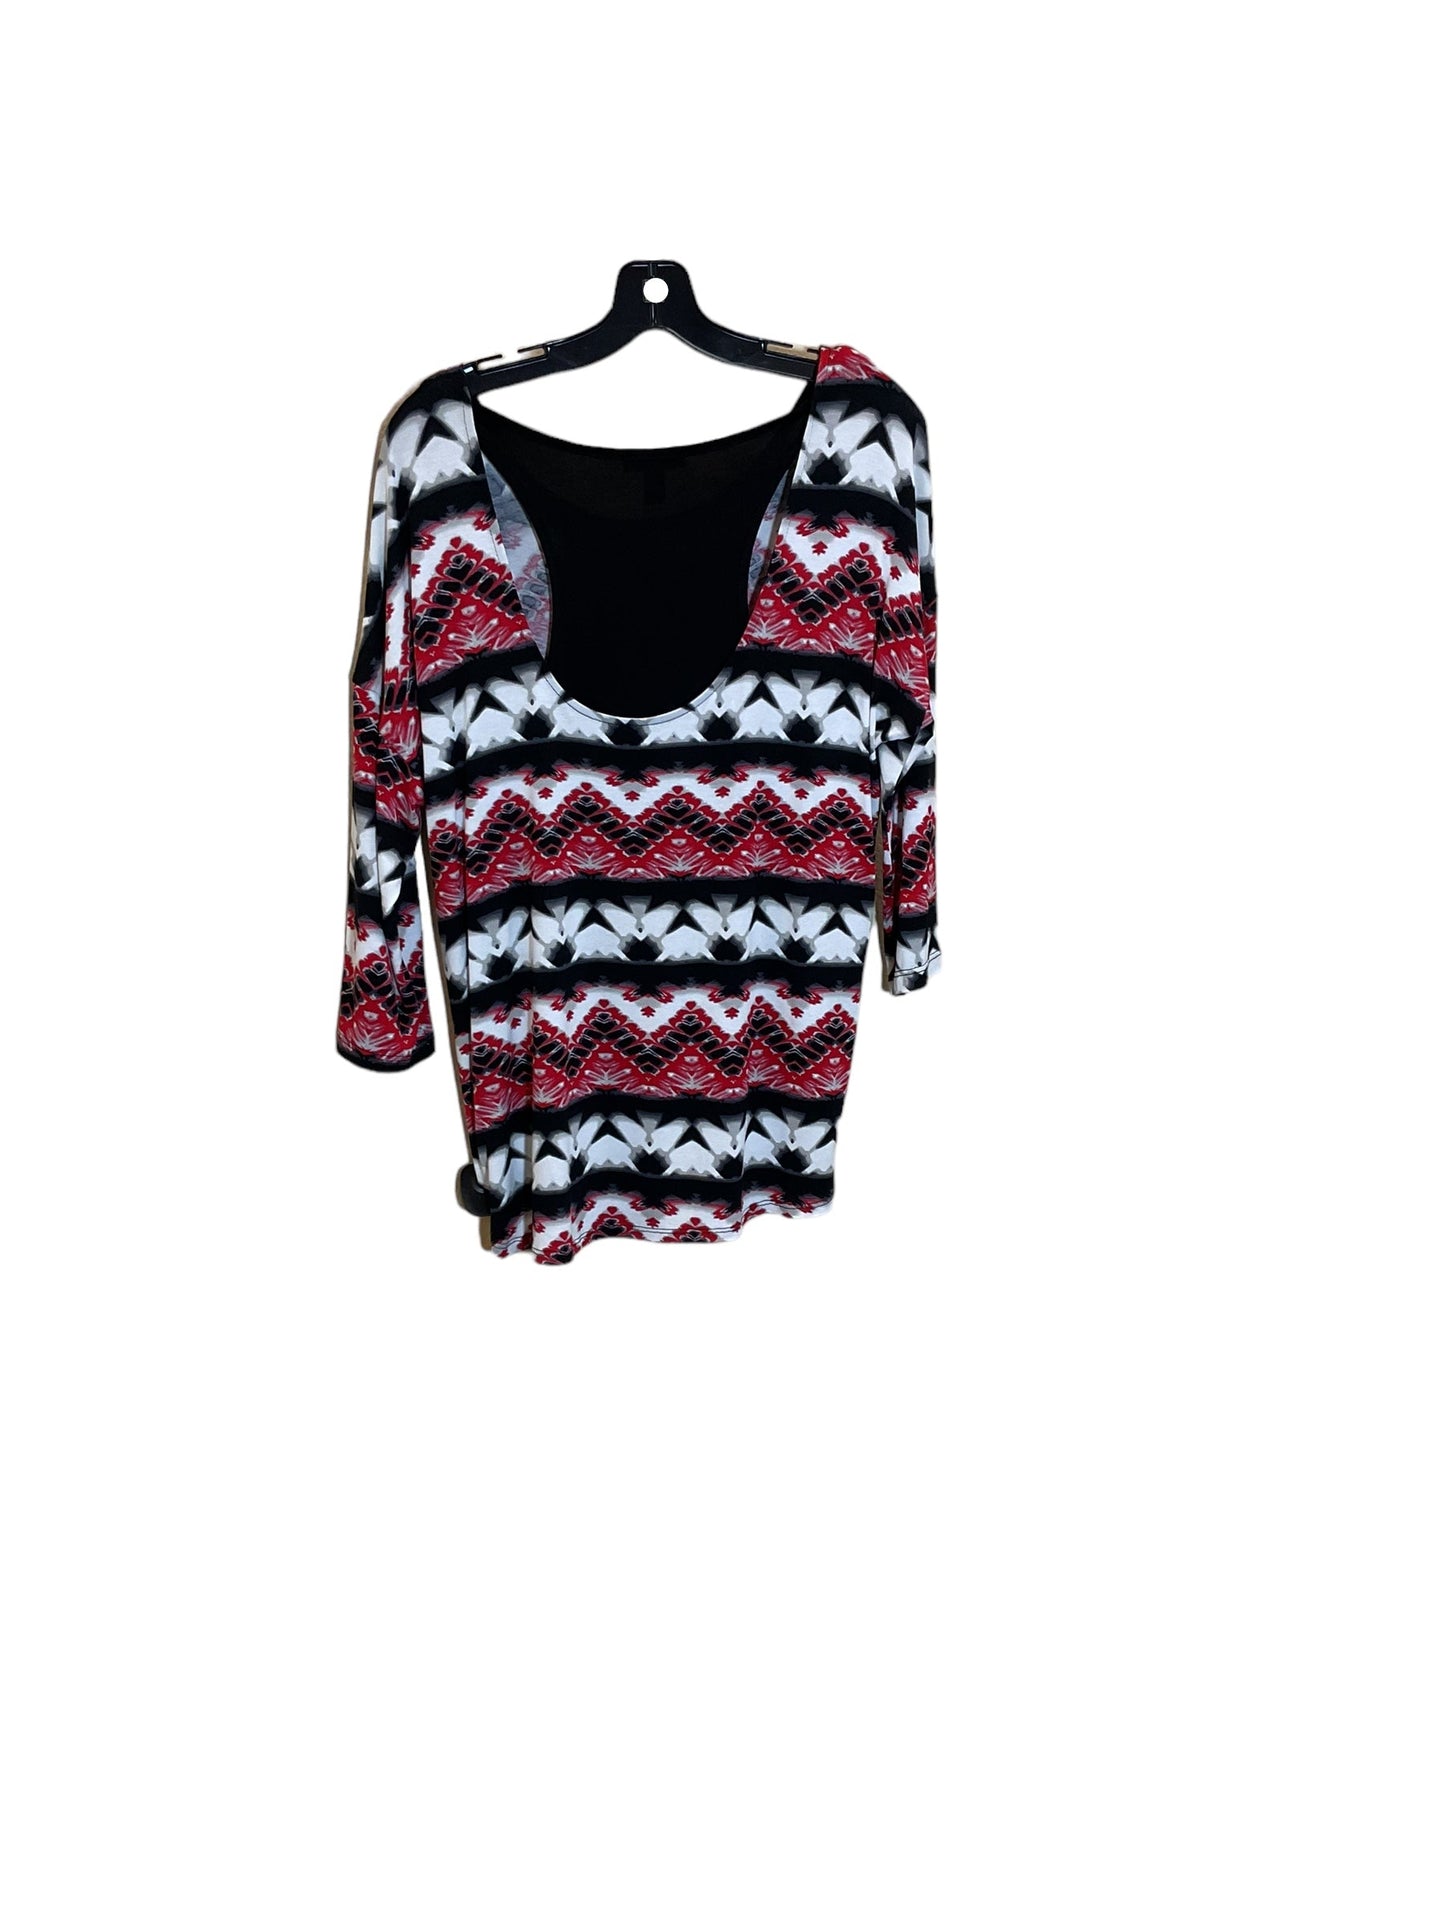 Multi-colored Top 3/4 Sleeve Tribal, Size M